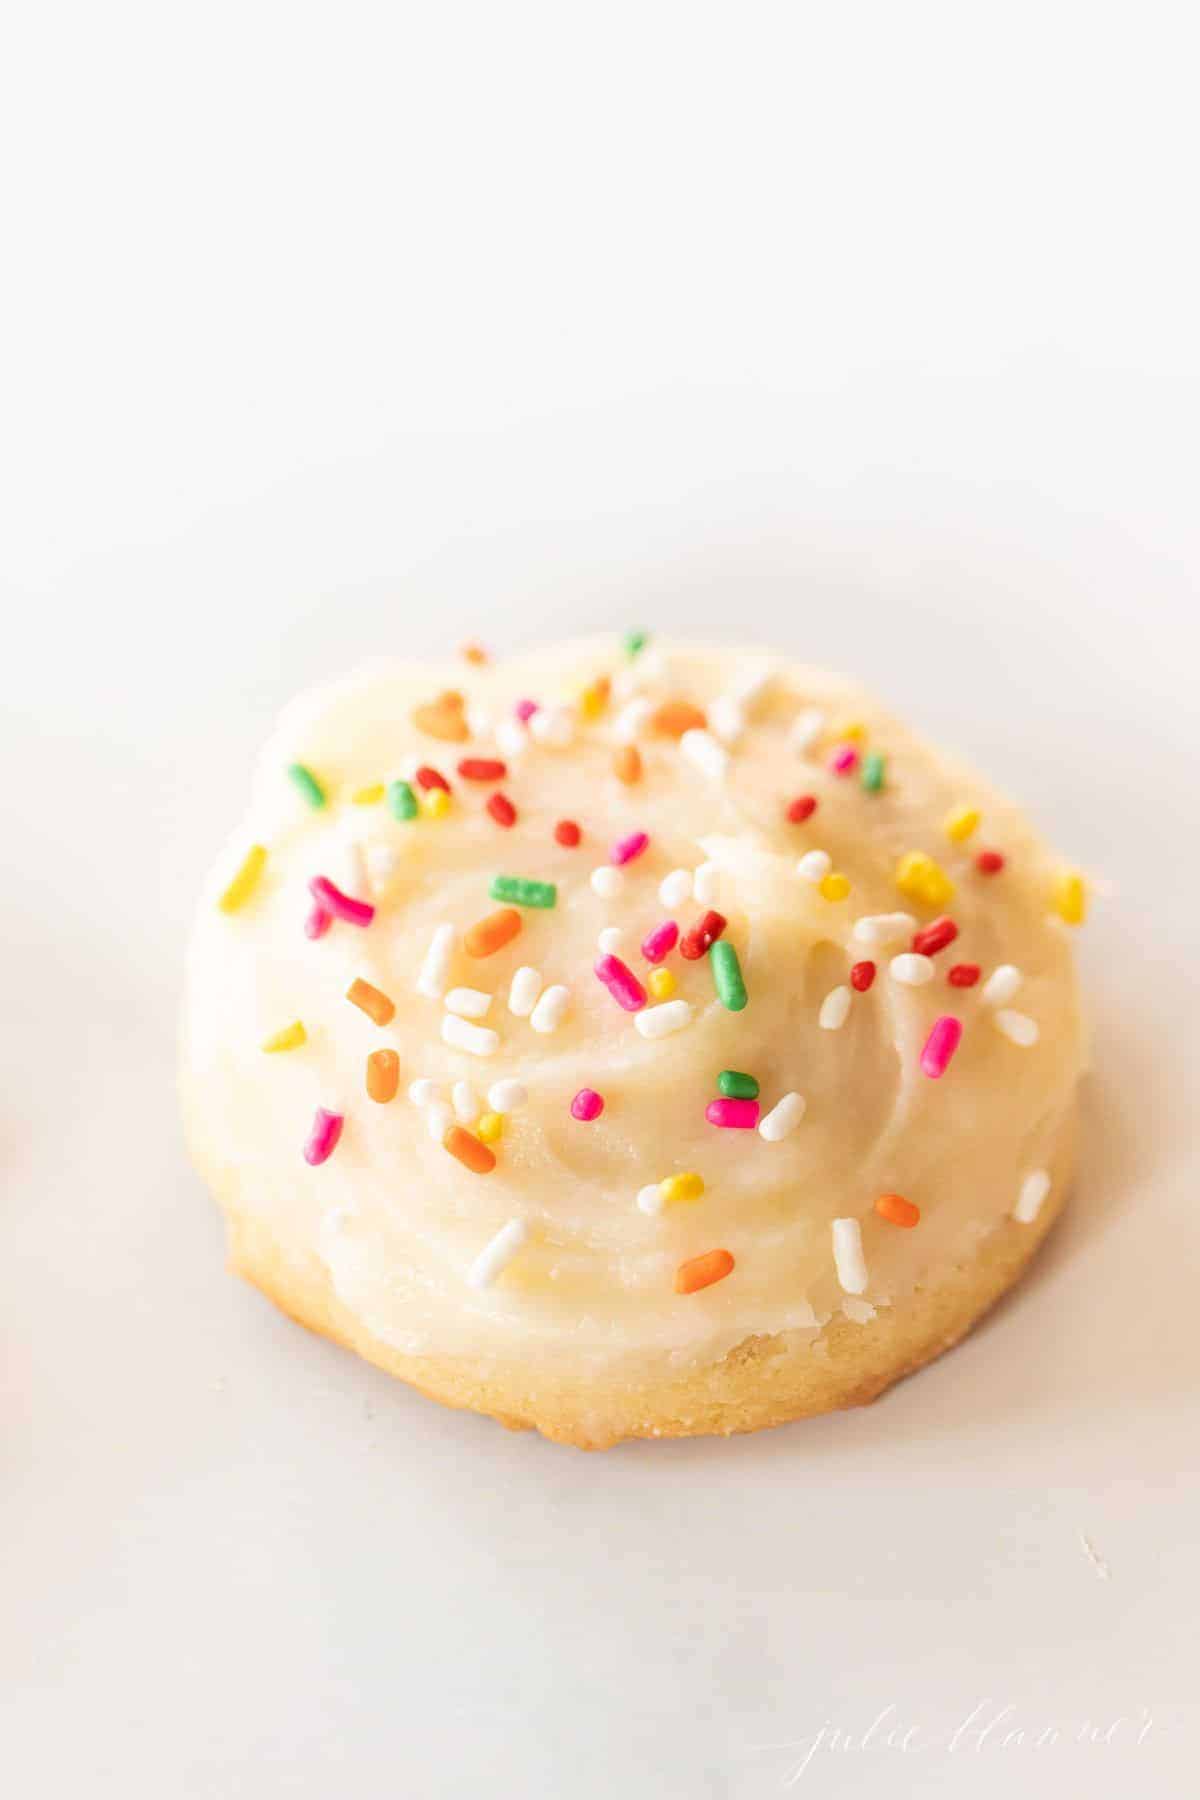 A single melt in your mouth sugar cookie frosted with sprinkles on a marble surface.